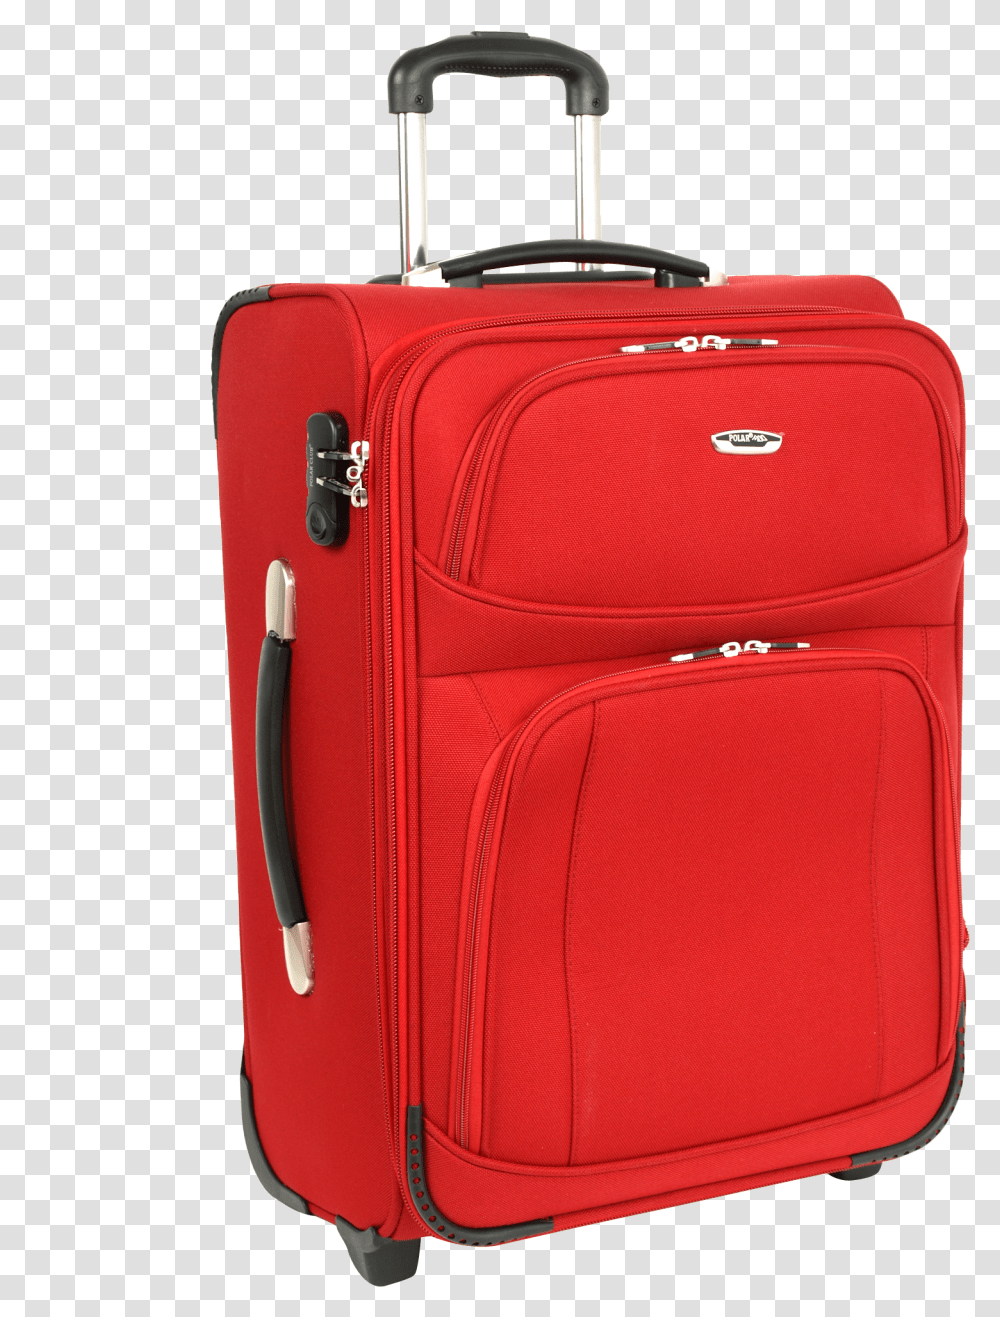 Luggage Suitcase Images Free Luggage Bag, Backpack Transparent Png